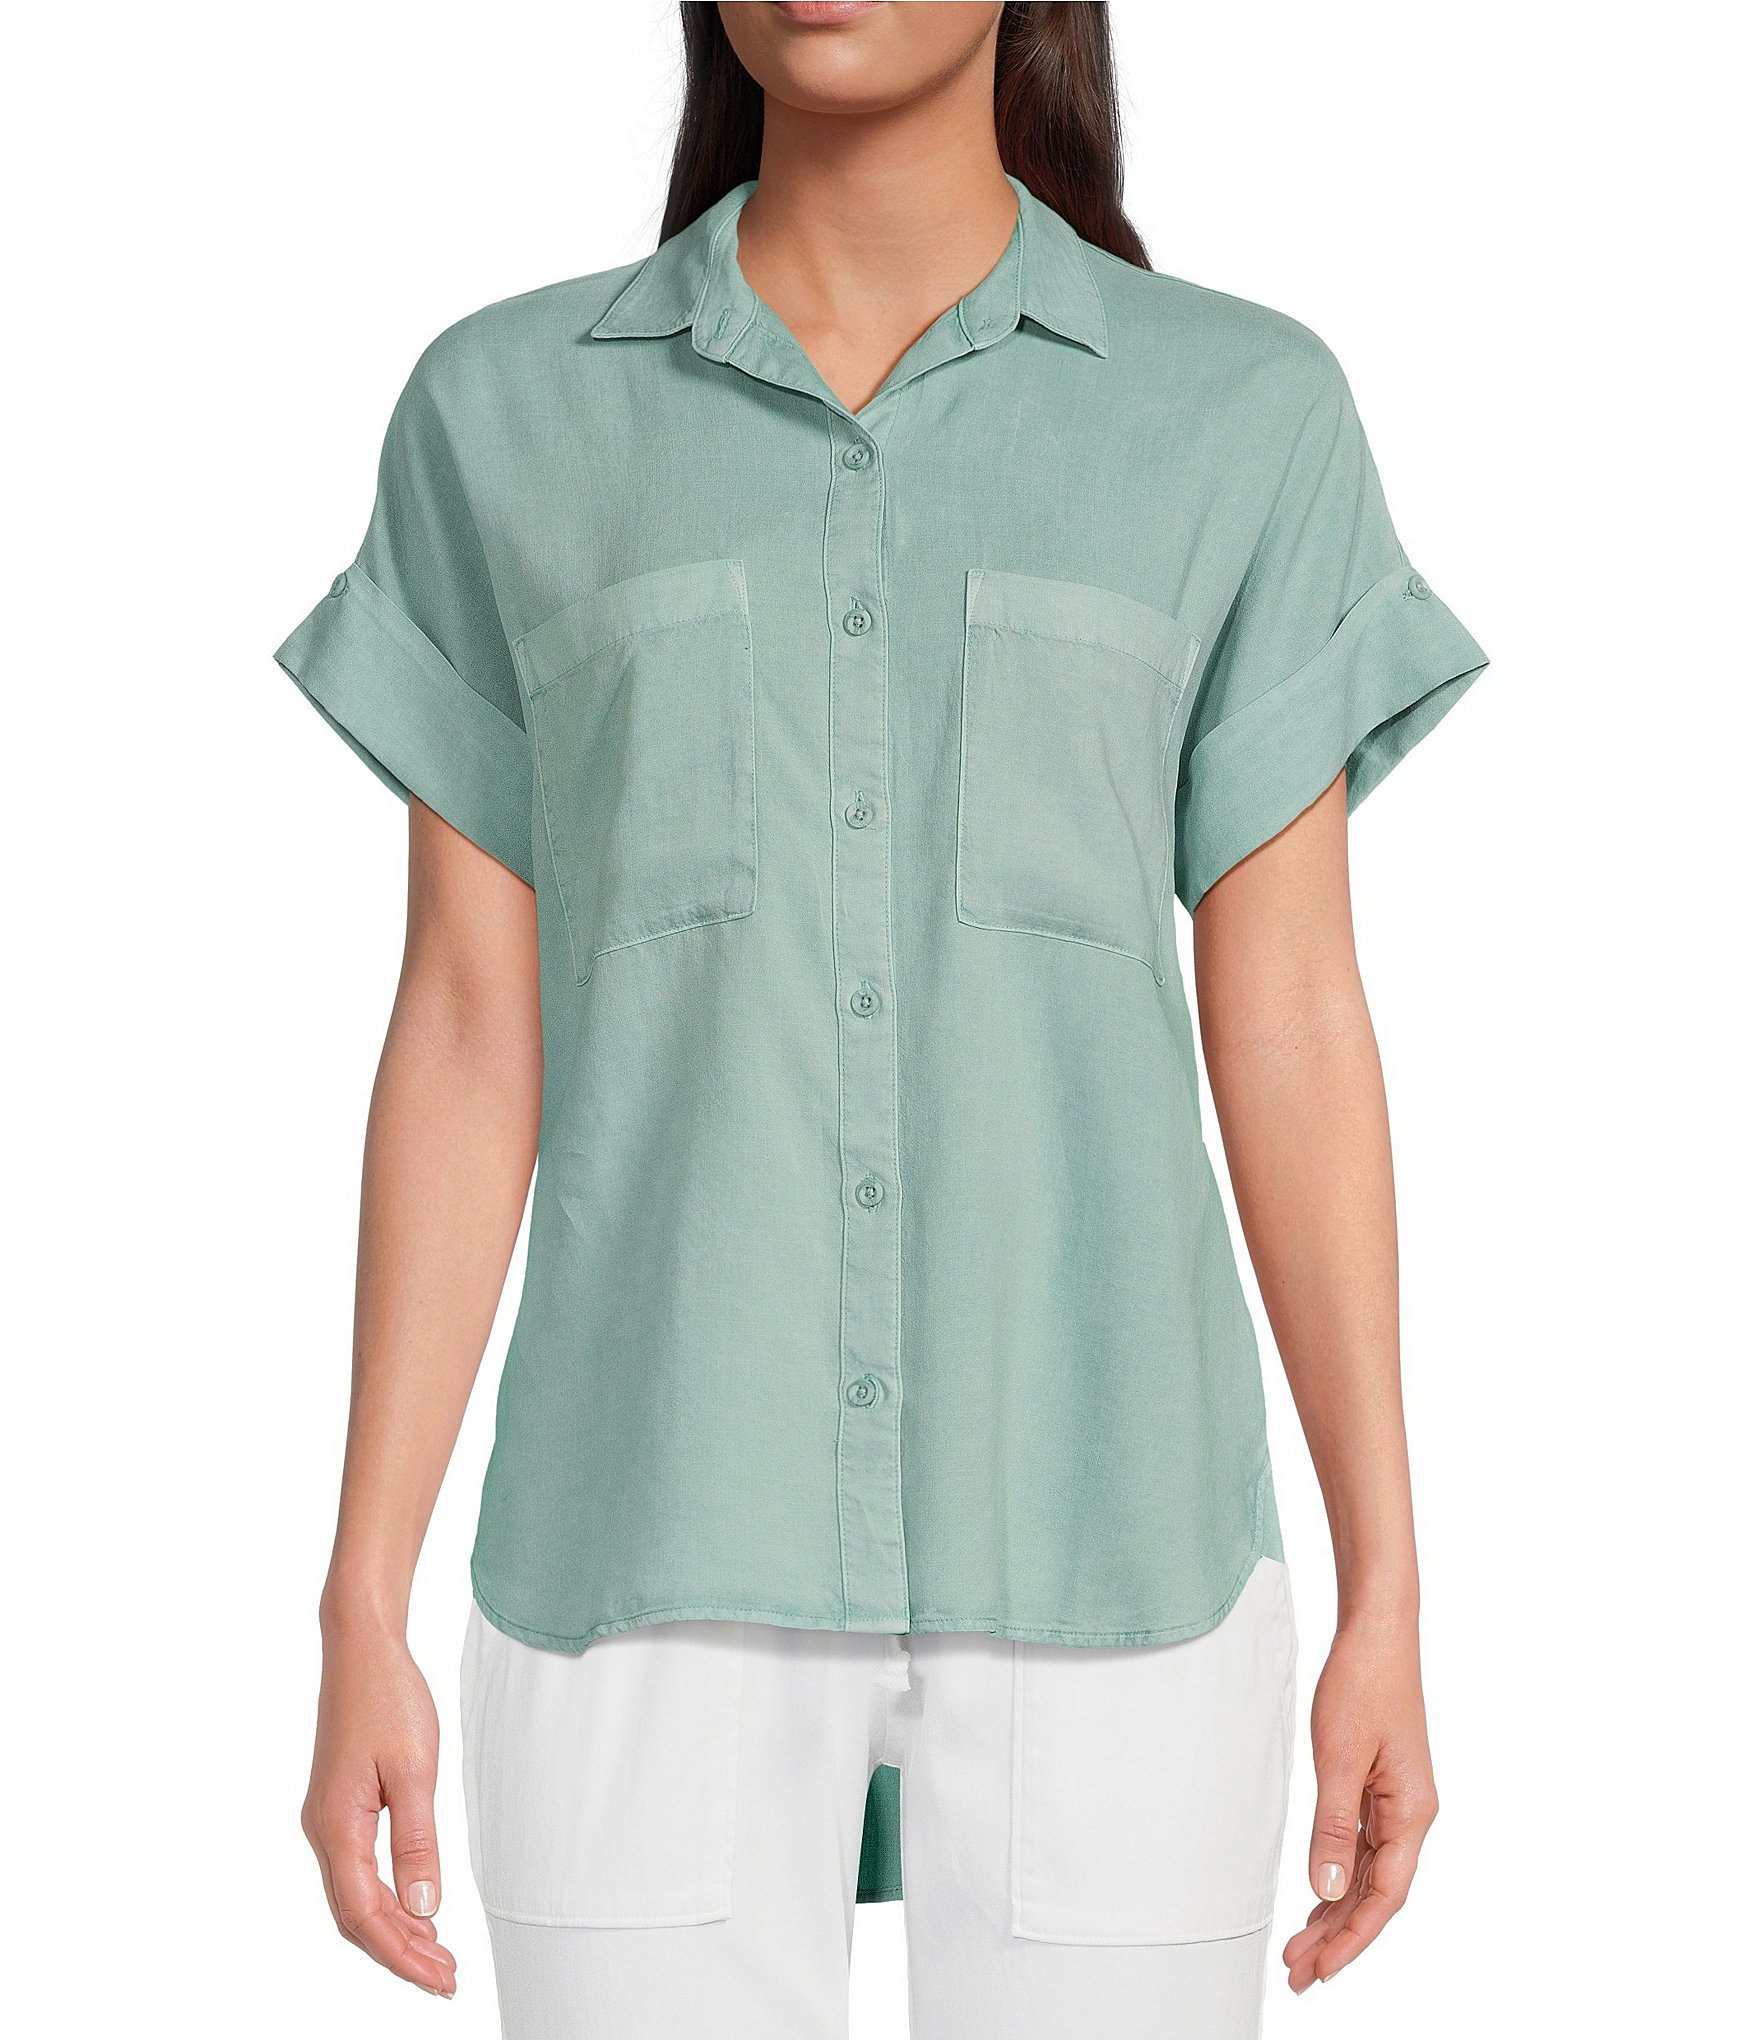 Roll It Up: Top Short Sleeve Button Down Shirts for Spring